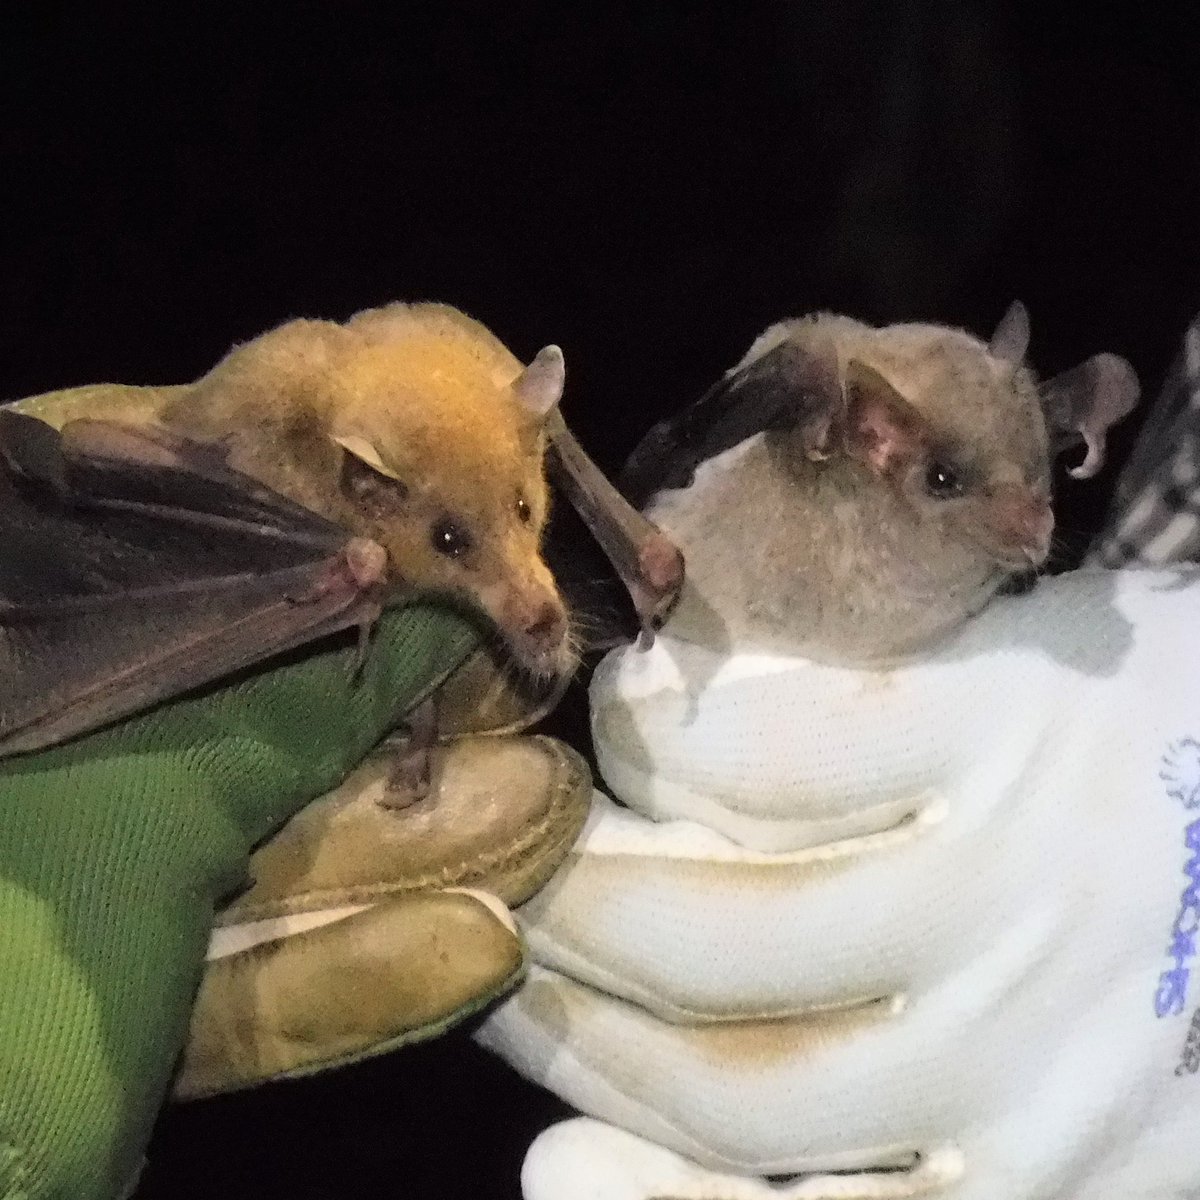 [Tweet by  @BatsForLife] In 2014, I started my  #PhD at the  @universityofga’s  @UGAICON program. I spent 6 years studying endangered pollinating bats in northeast Mexico that feed on agave nectar (which, by the way, we use to make  #TEQUILA!).